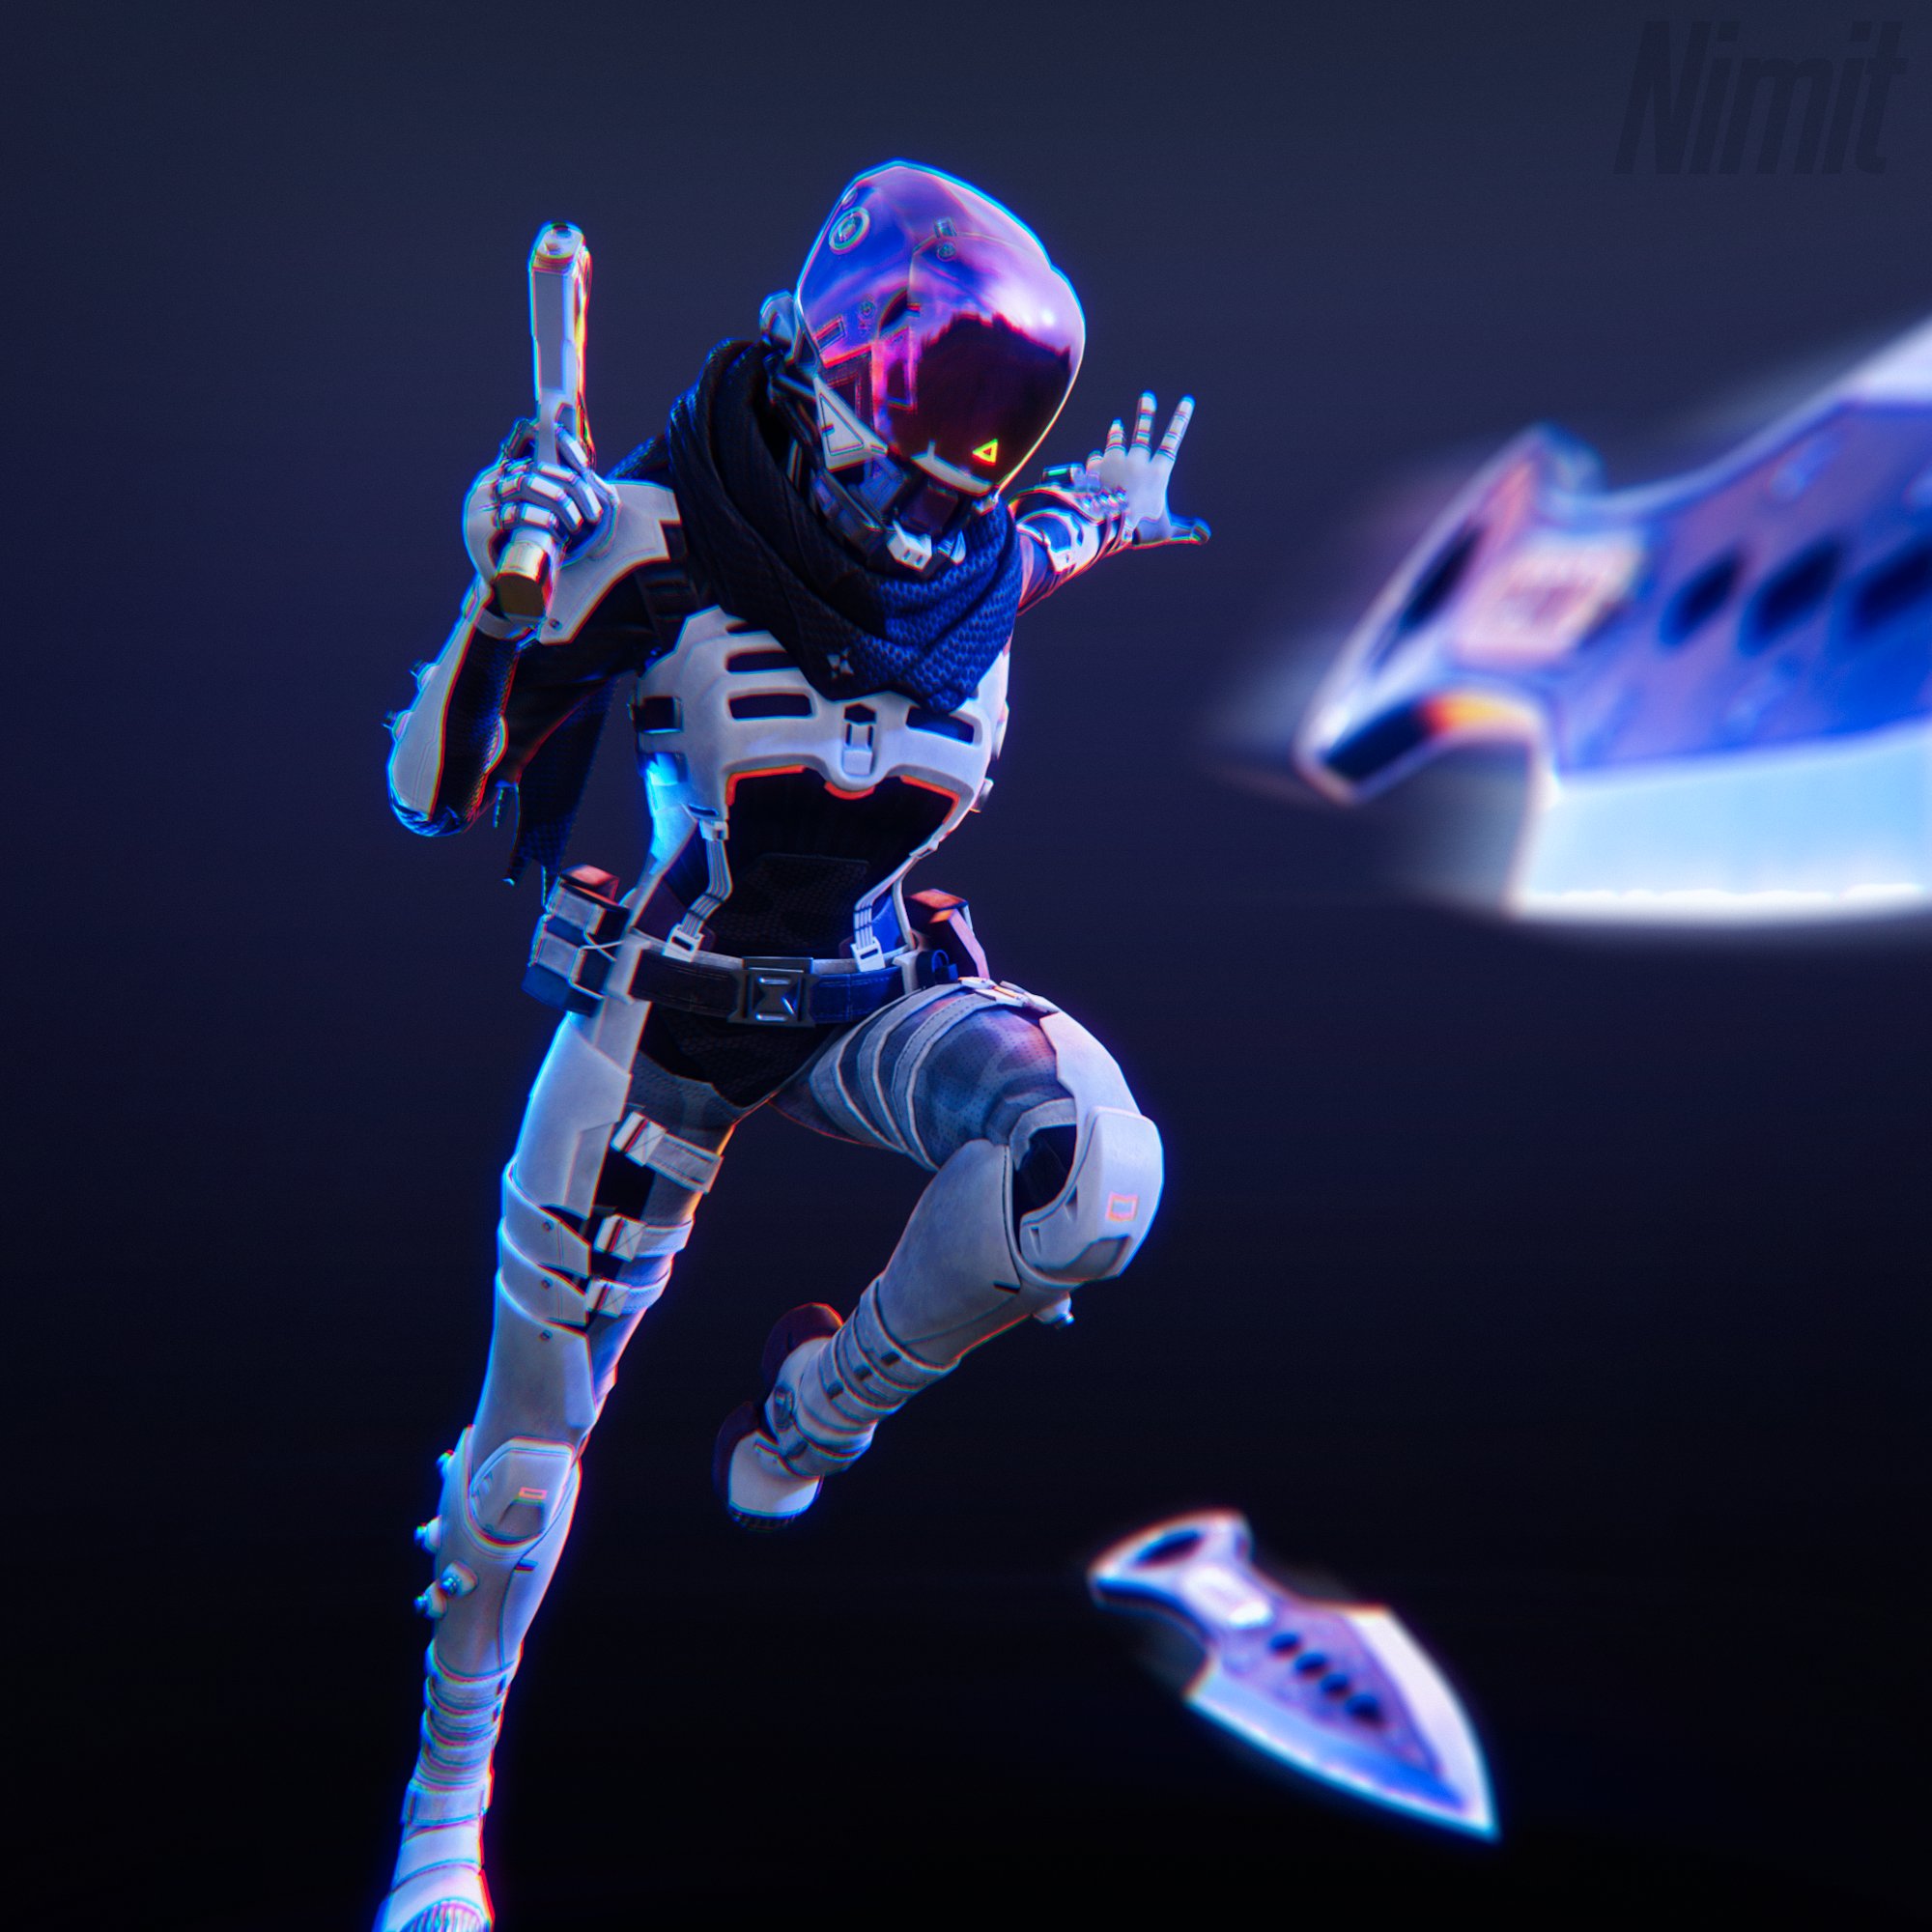 Nimit Remade That Wraith Heirloom Pose Lmk What You Think All Support Is Appreciated Apexlegends Apexart Wraith T Co Wlf1sdcnpf Twitter